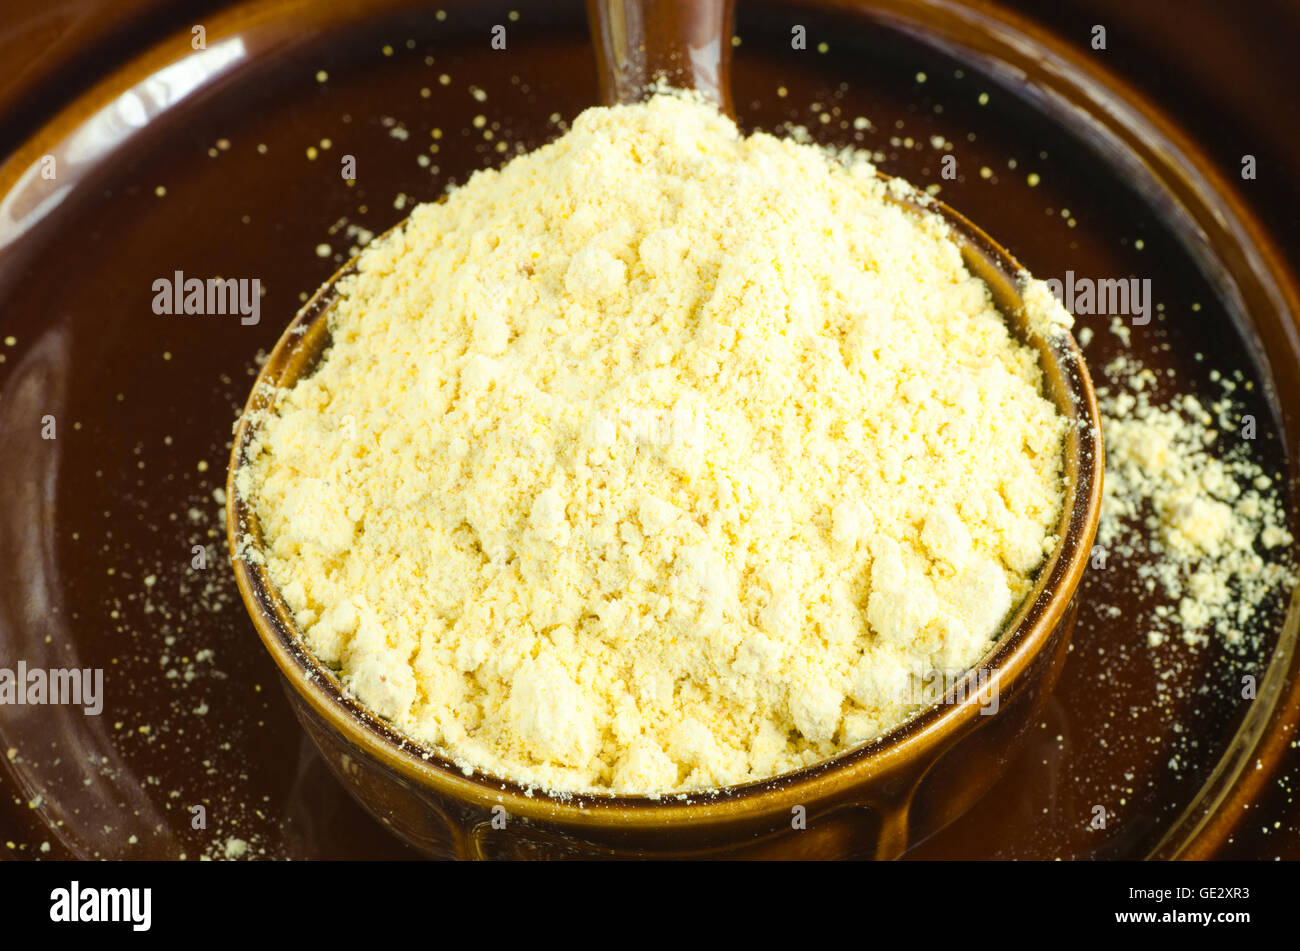 portion of cicer flour in brown bowl Stock Photo